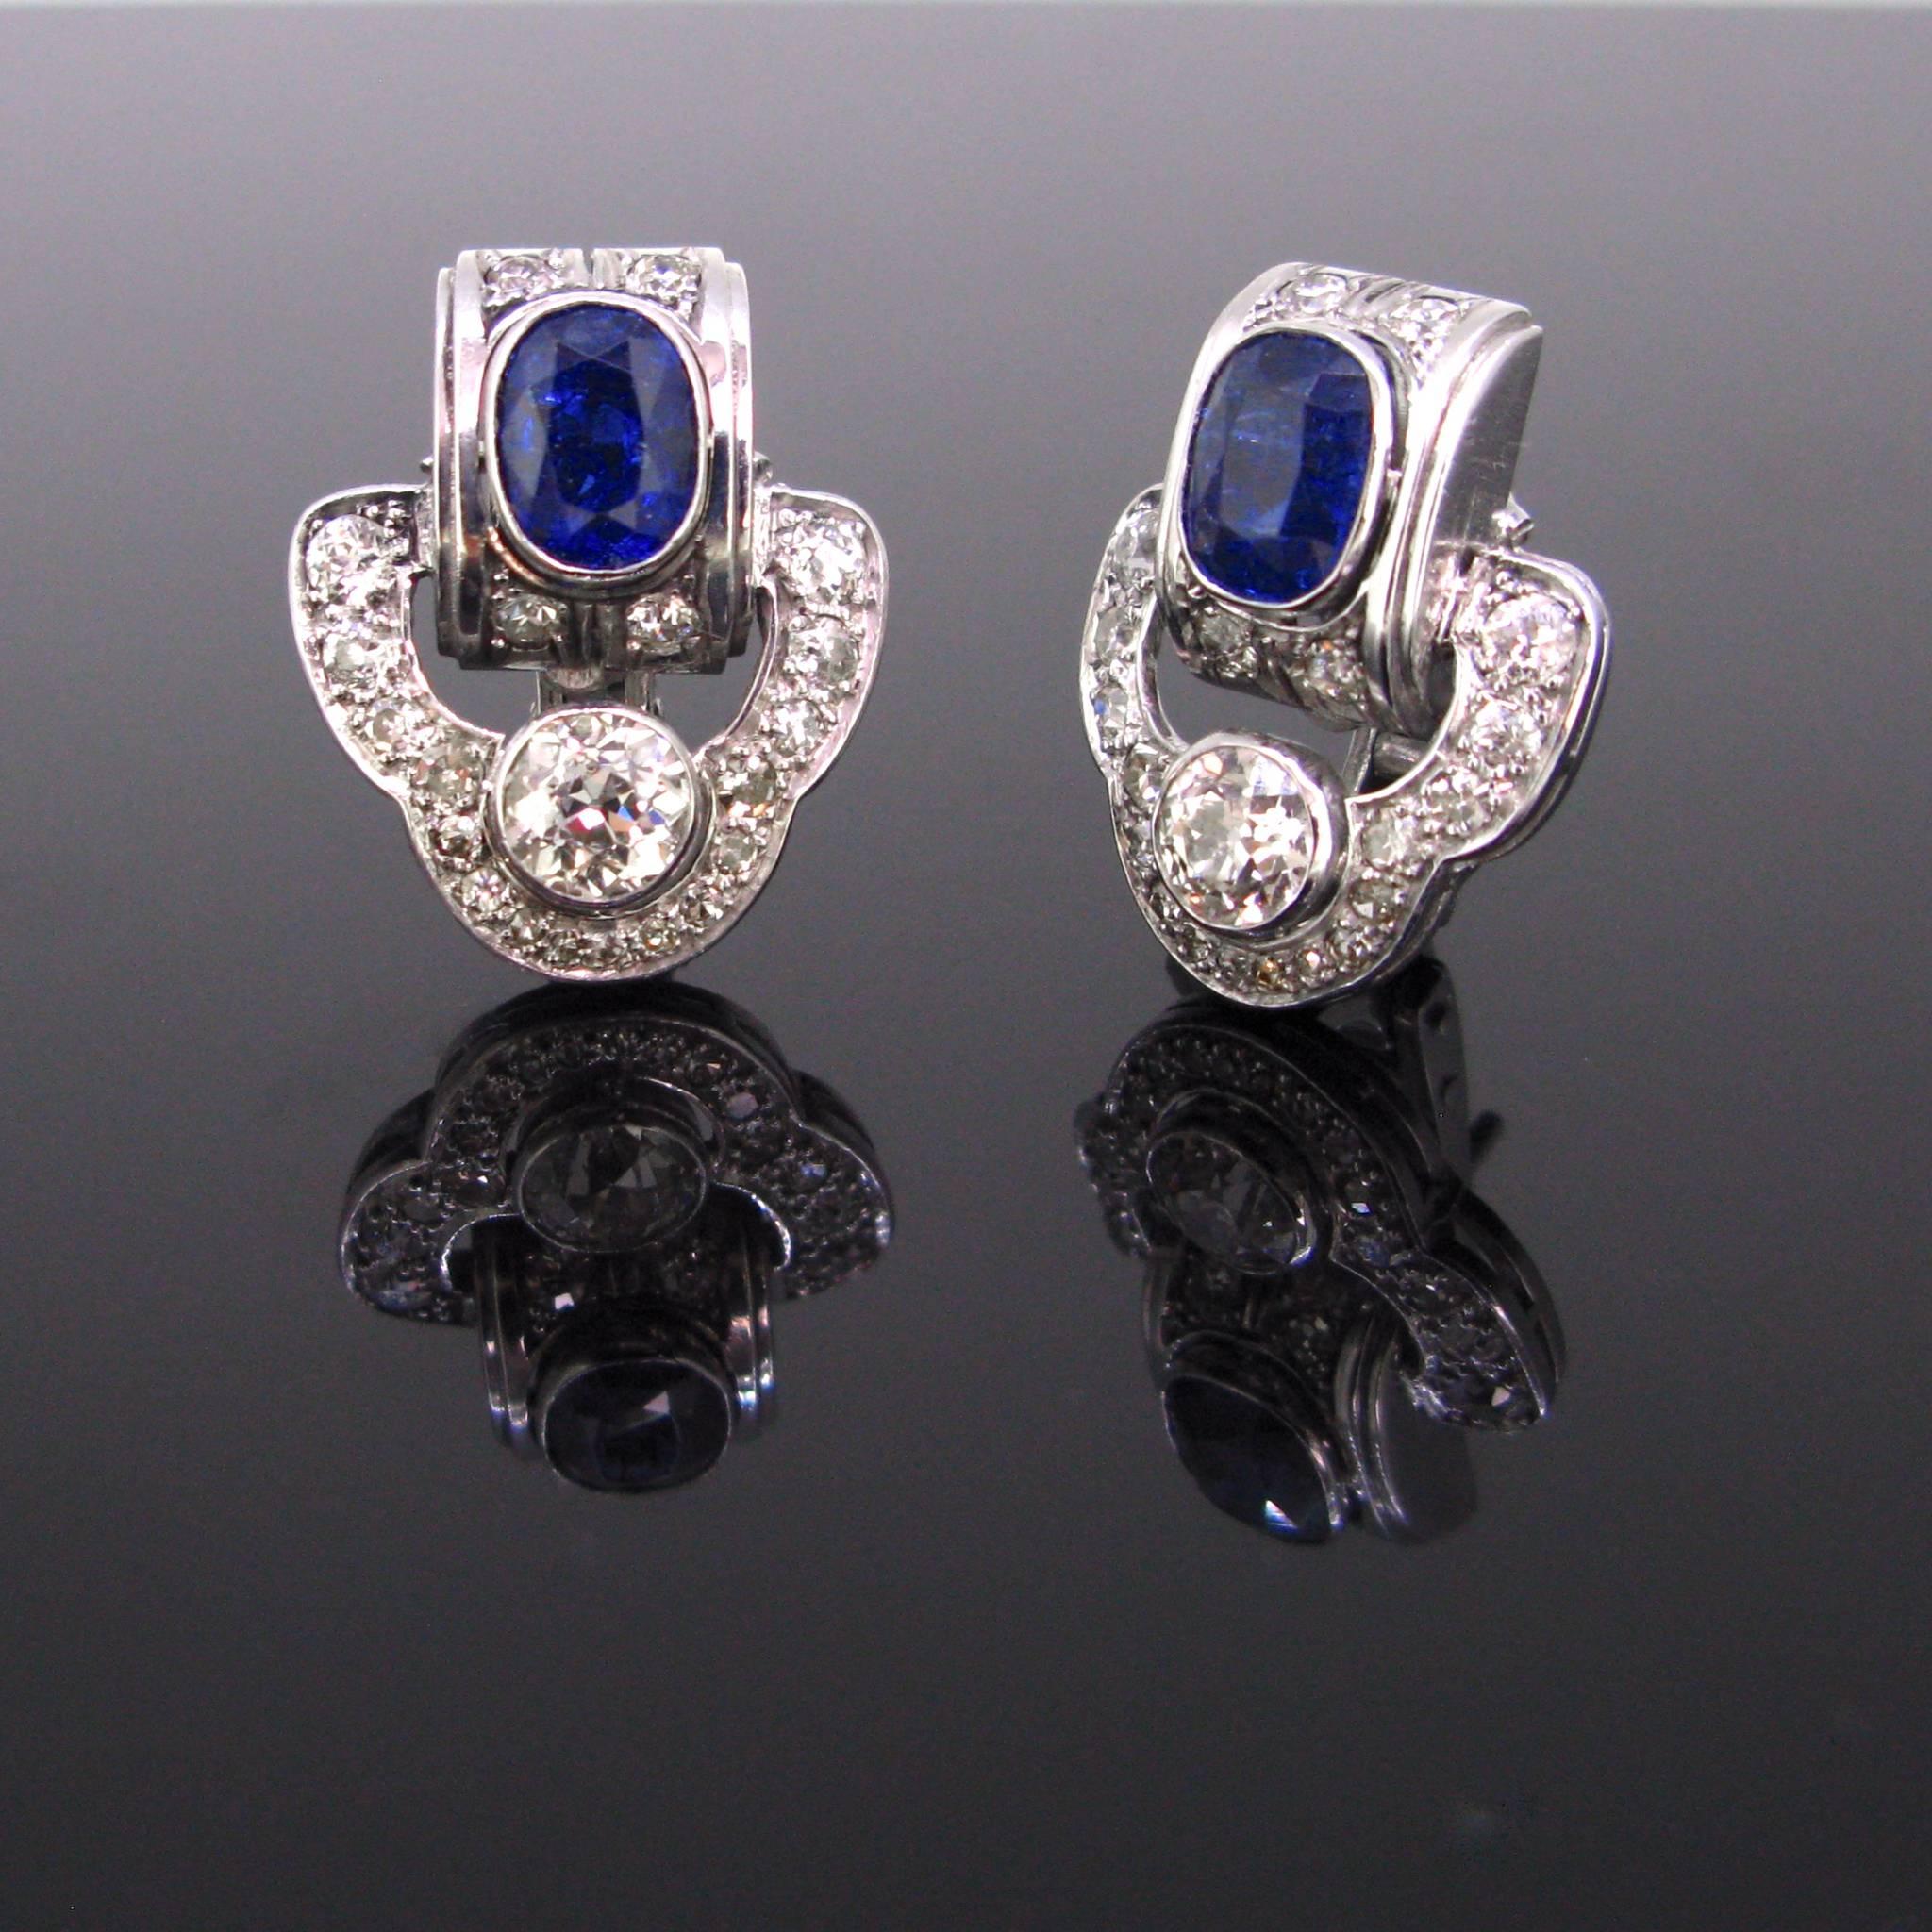 This beautiful pair of earrings is directly from the Art Deco ear with its geometric design. Each earring features a natural sapphire weighing approximately 1.35ct each and one Old European Cut diamond of about 0.60ct as well as 20 smaller Old